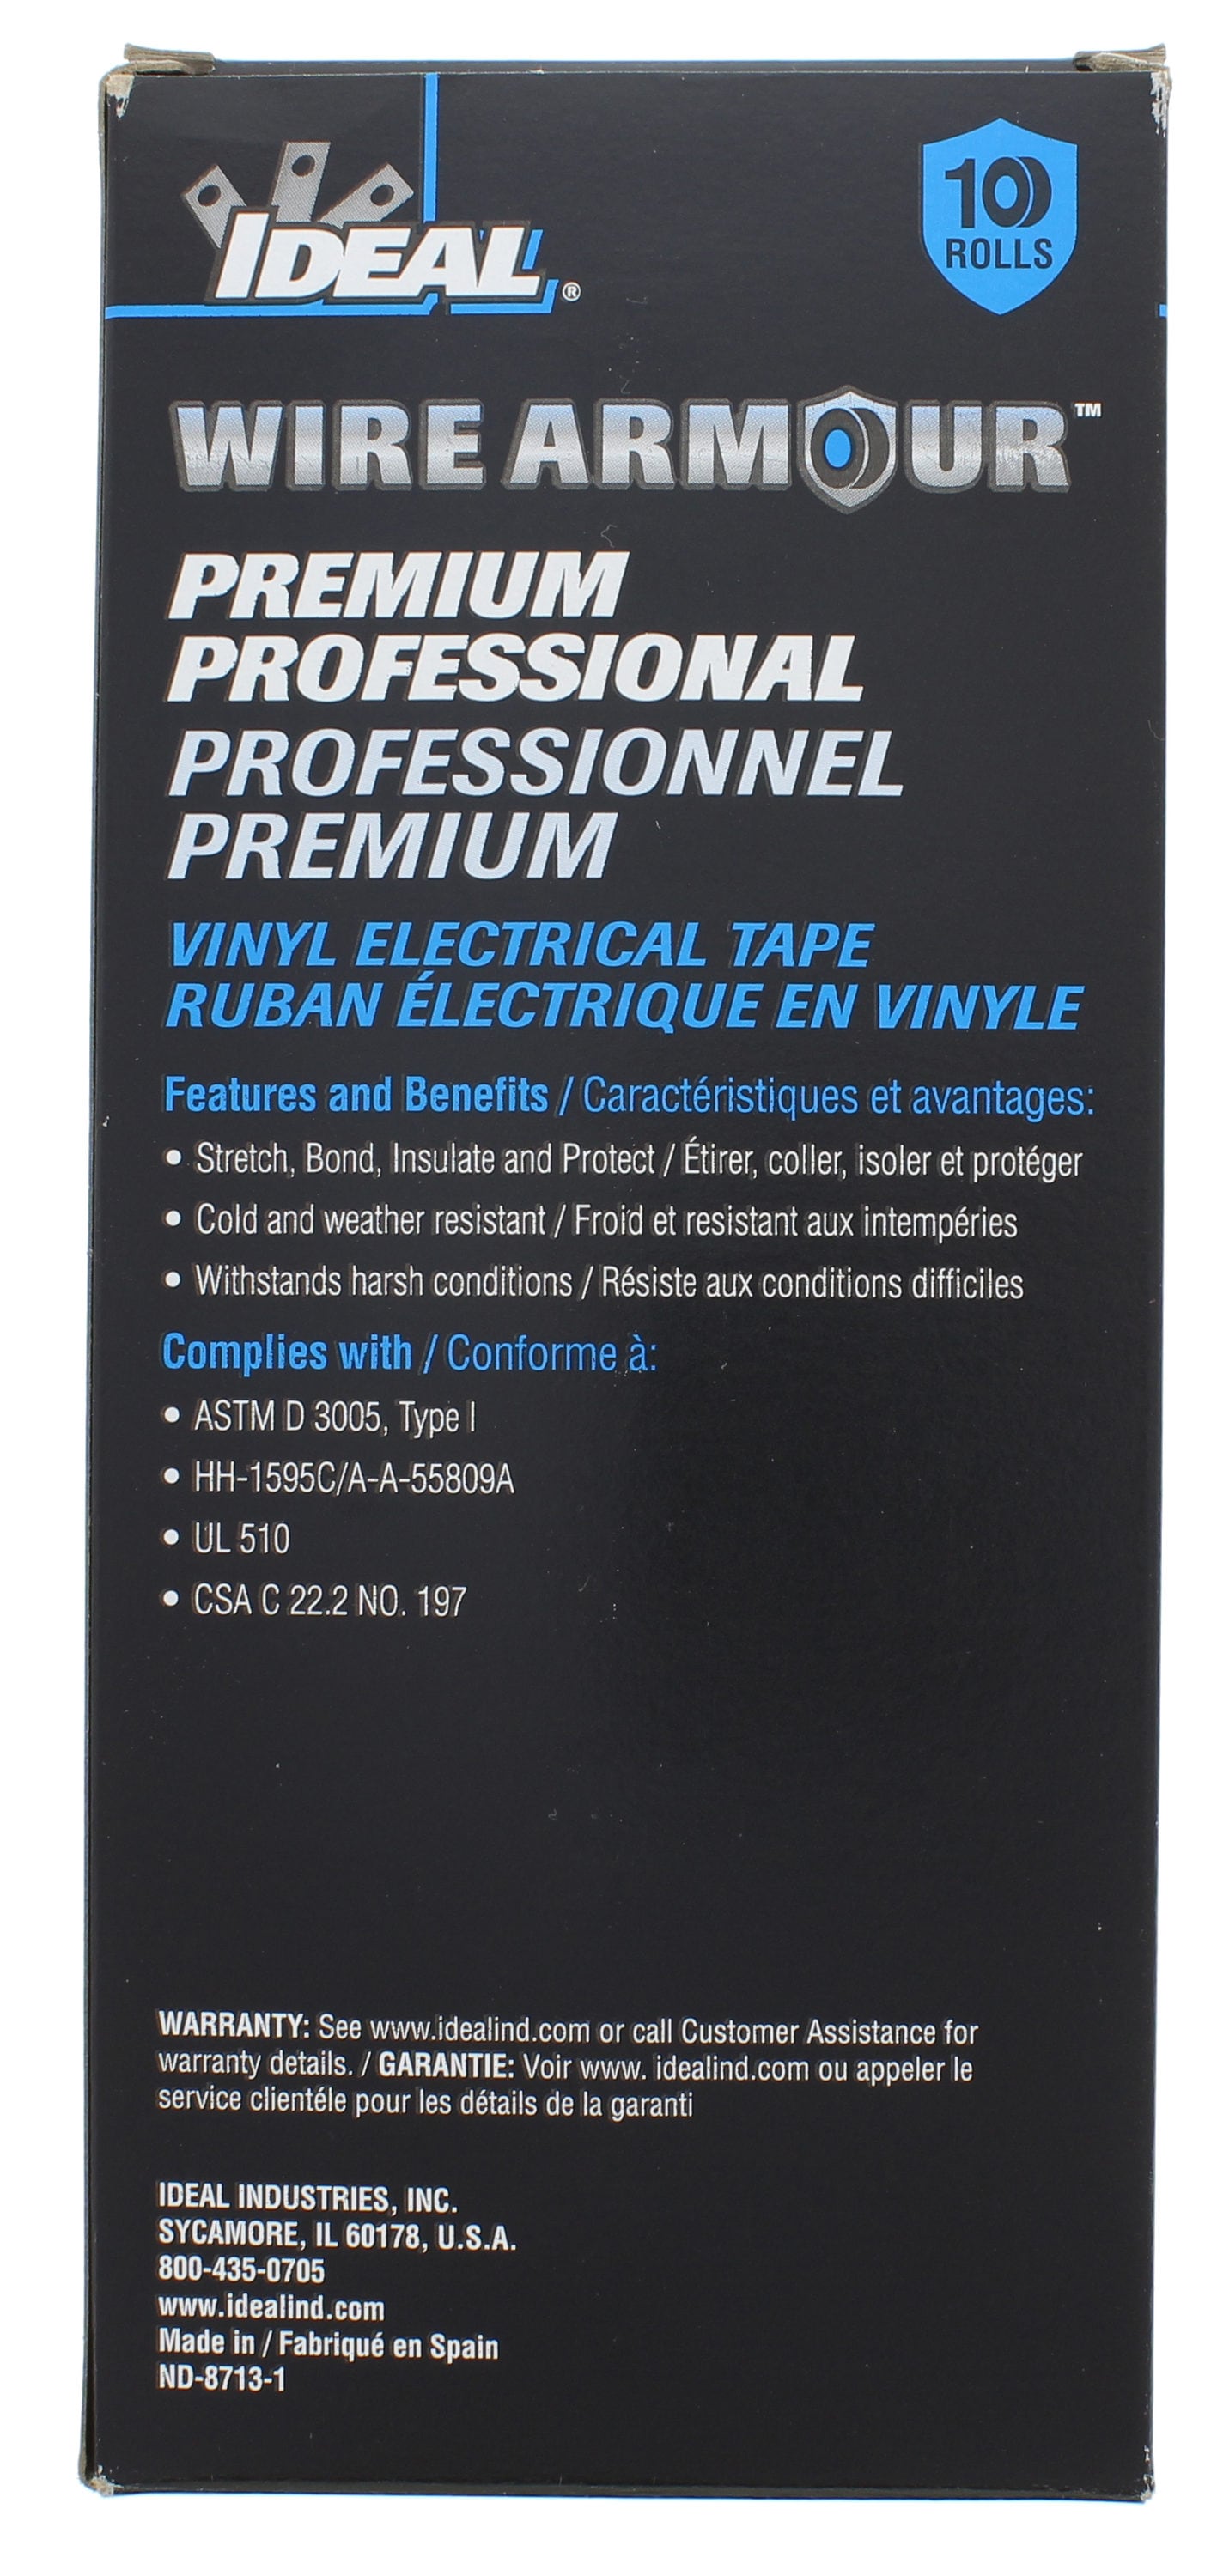 Scotch 3/4 in x 66 ft x 0.007 in. #35 Vinyl Electrical Tape, Brown